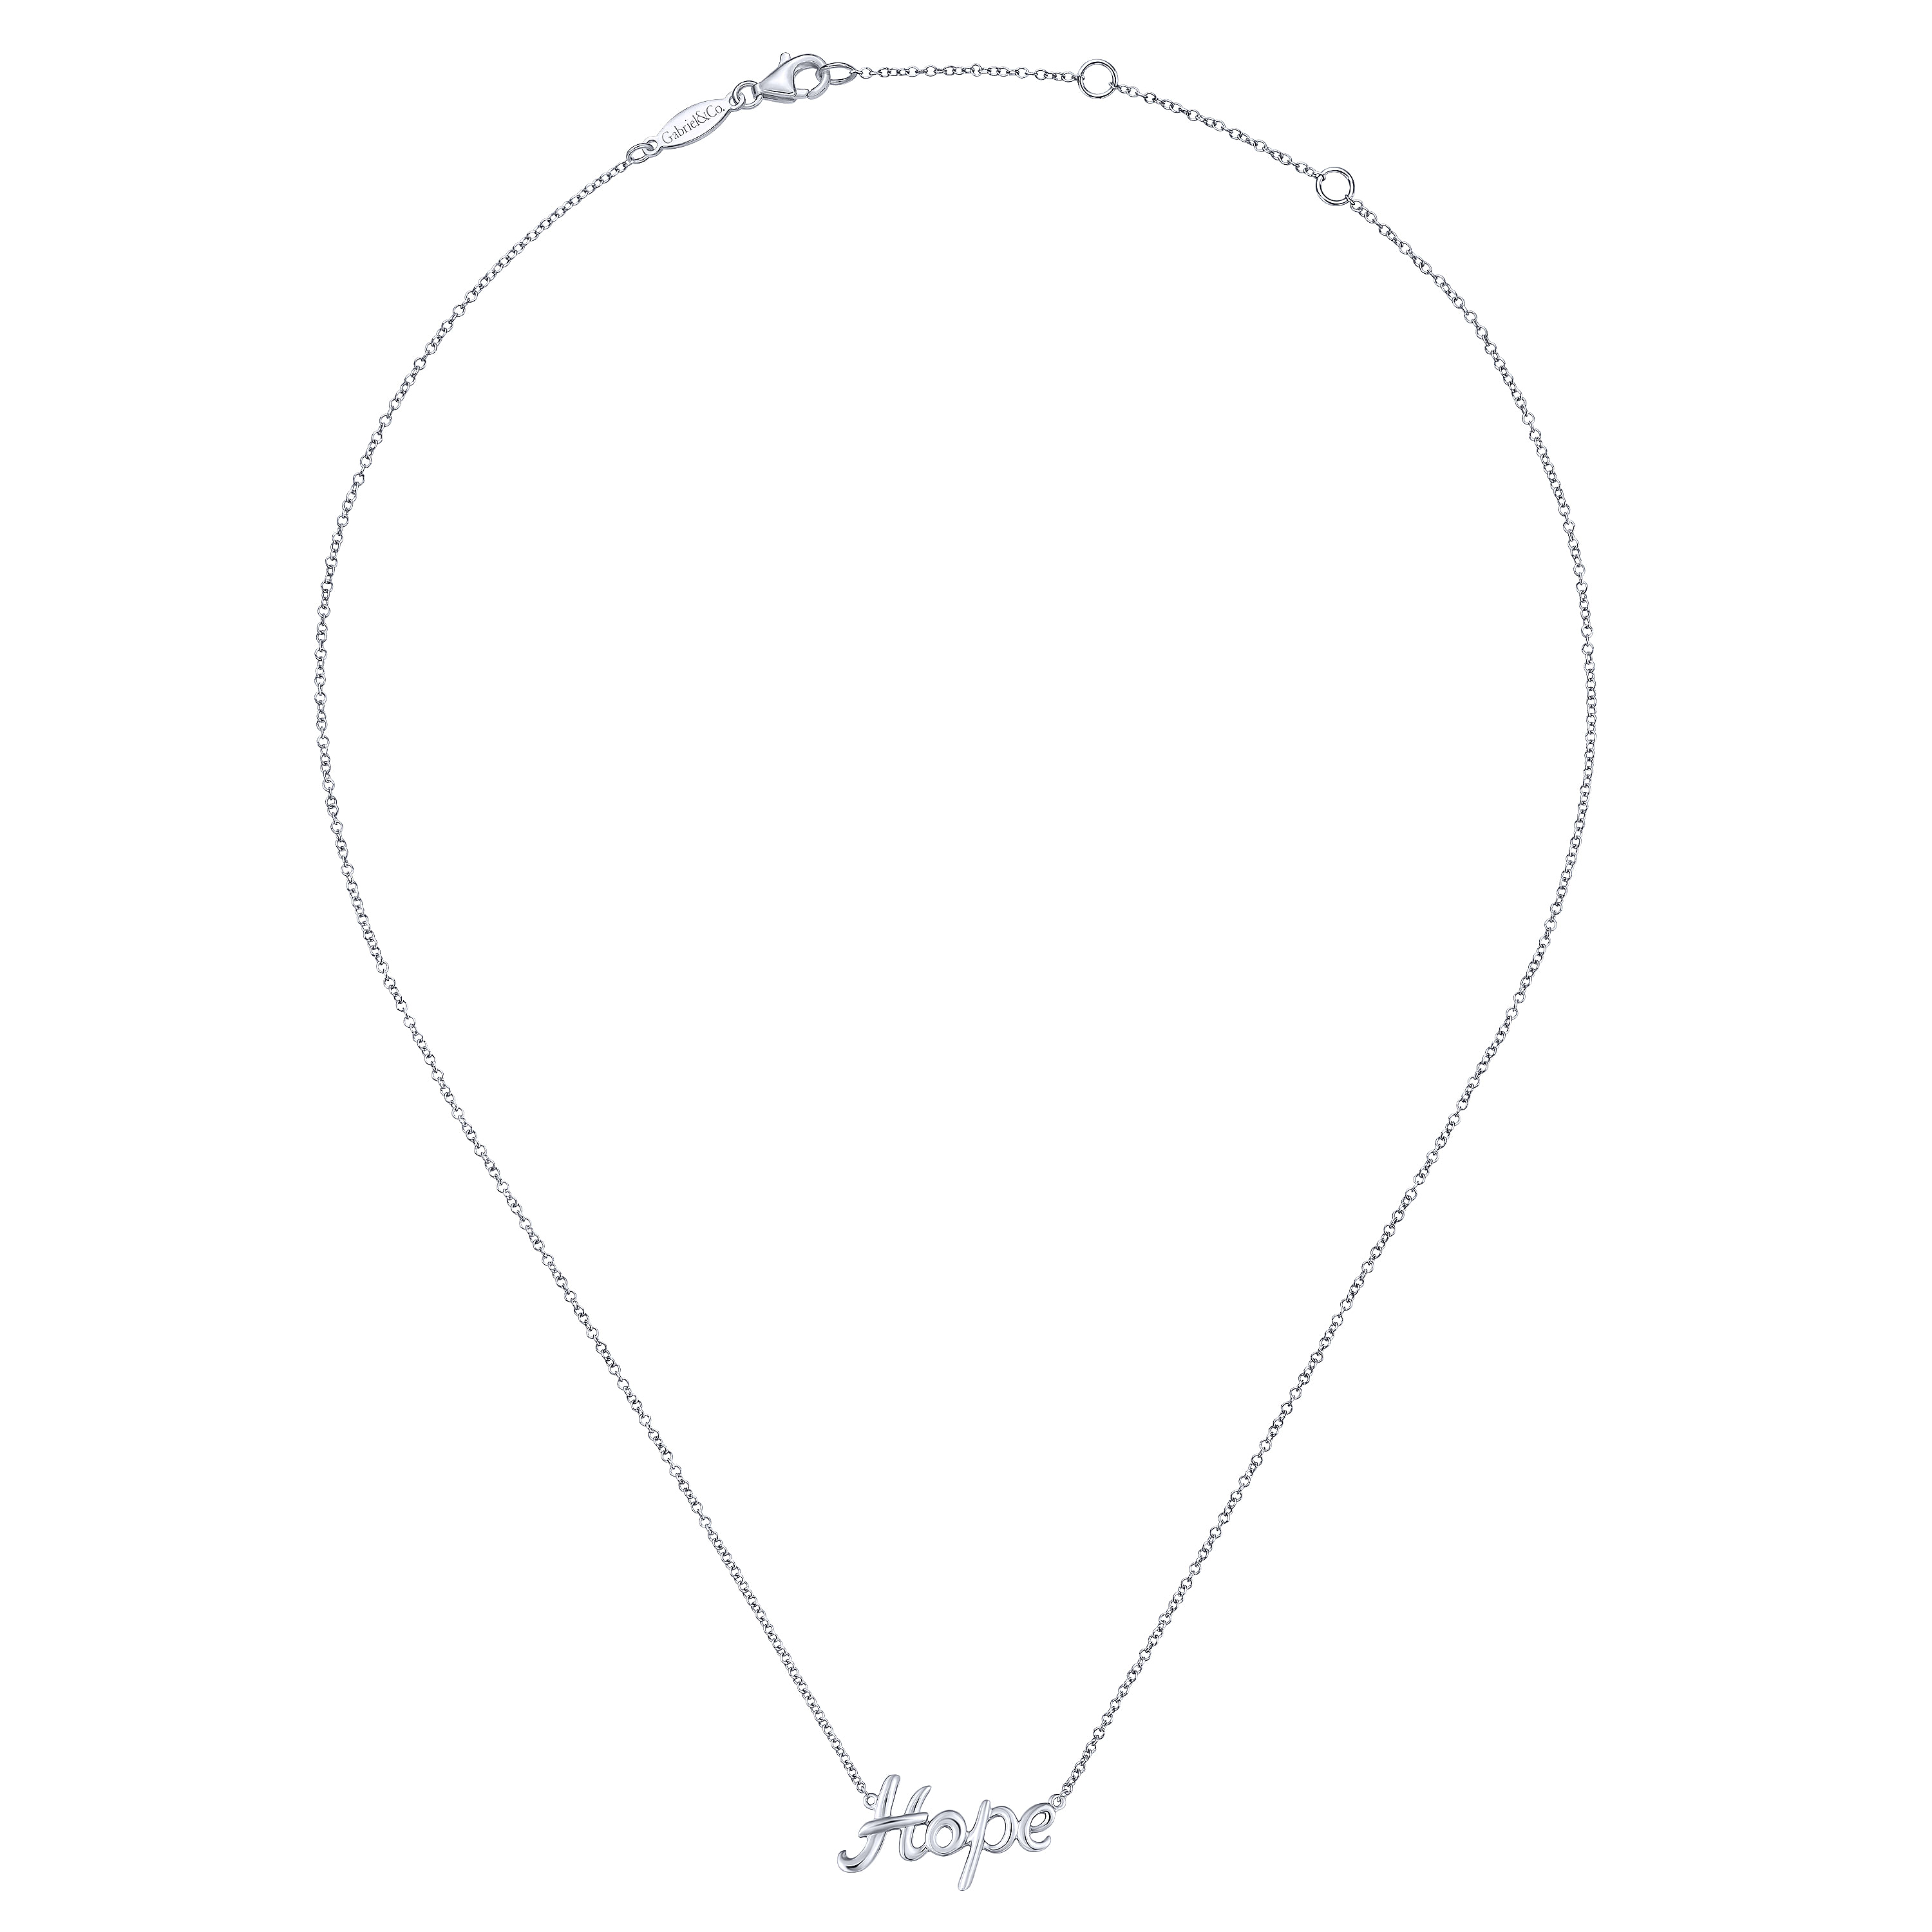 925 Sterling Silver Hope Necklace